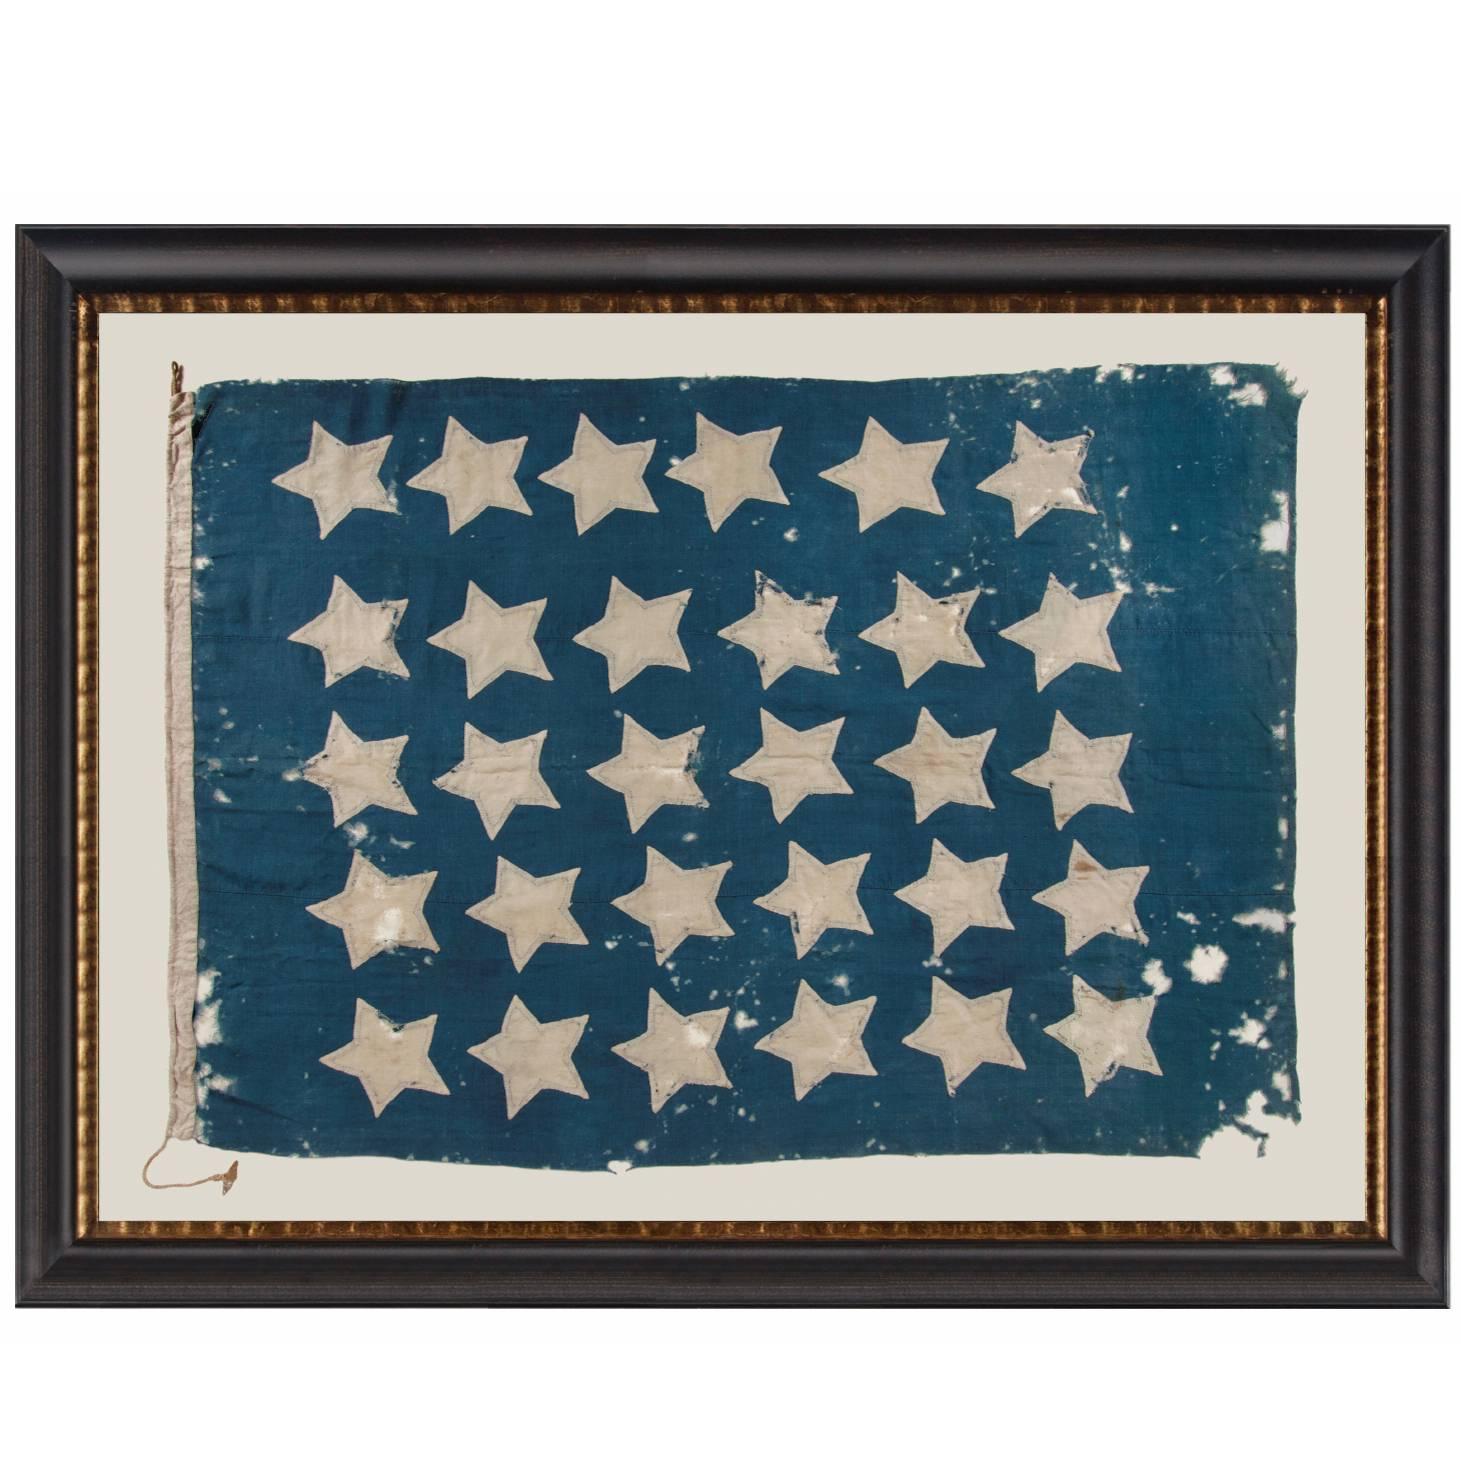 U.S Navy Jack With 30 Stars, Entirely Hand-Sewn, Pre-Civil War Example